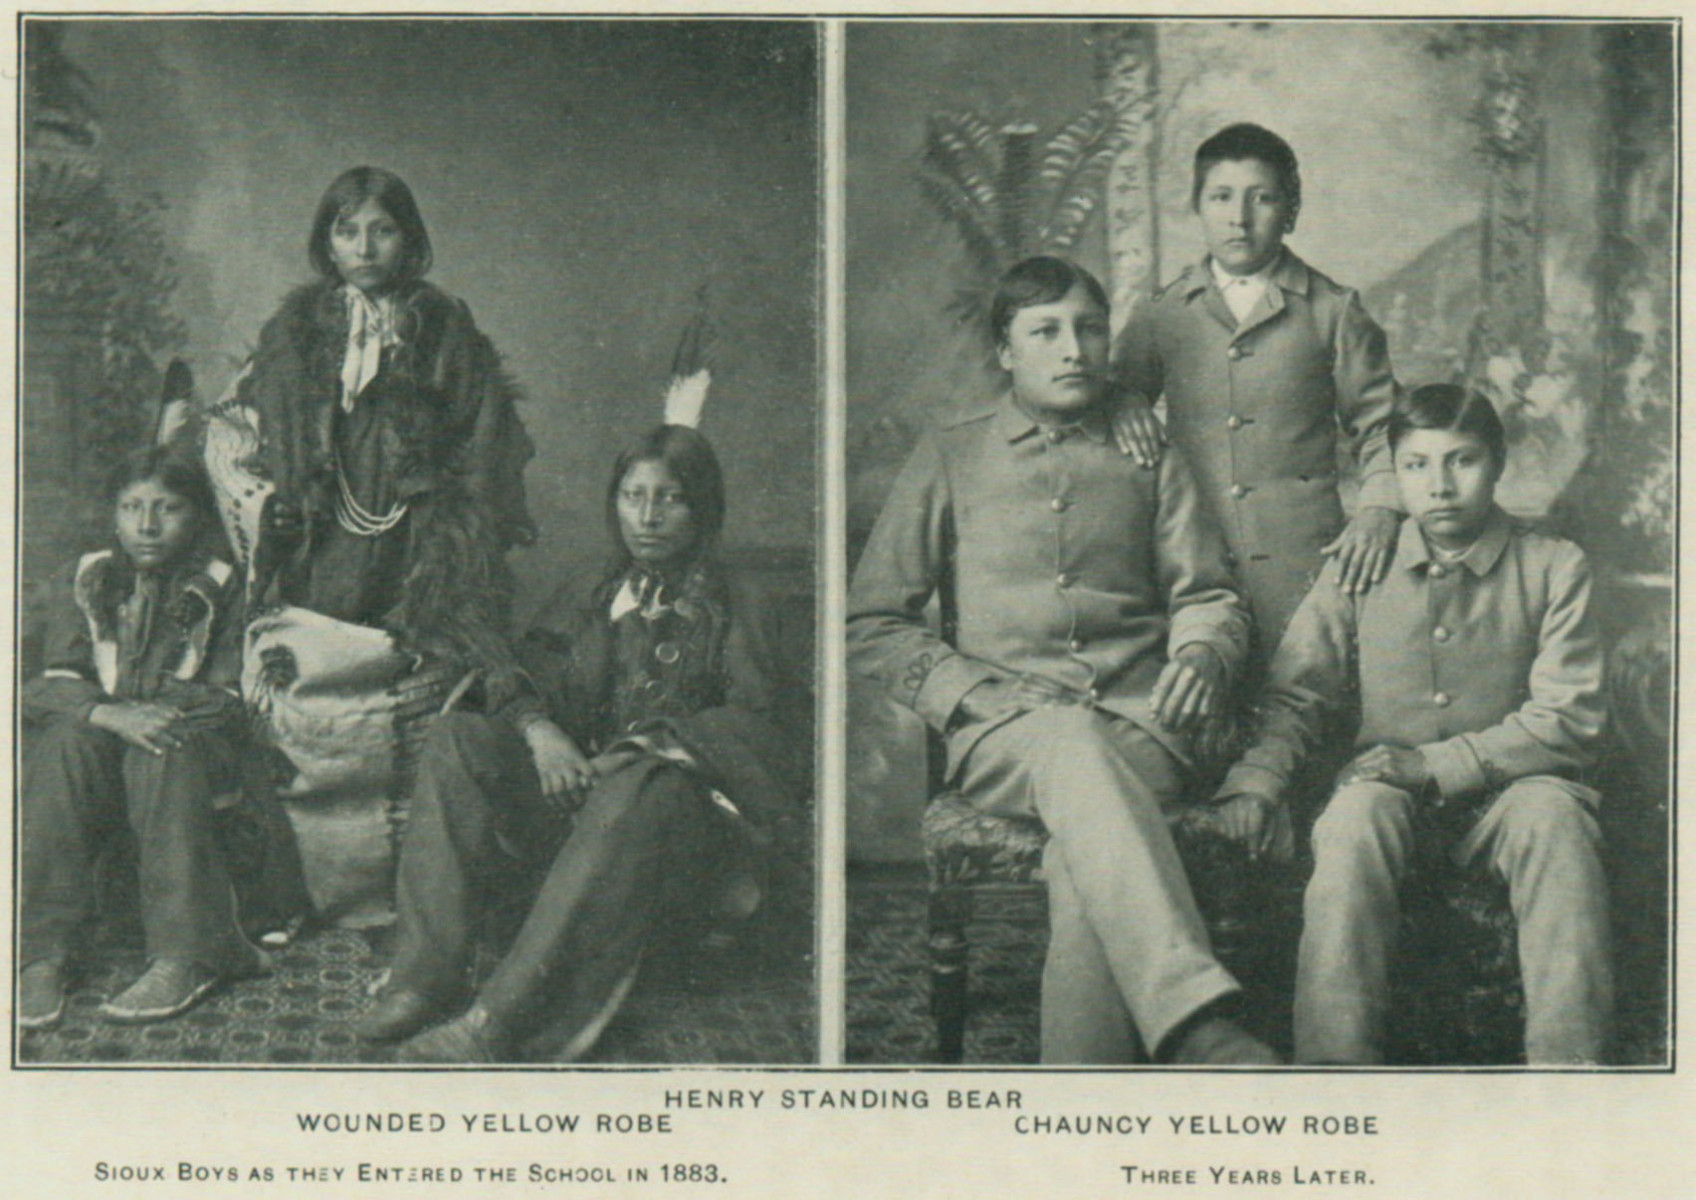 On left, three long-haired Sioux boys pose for the camera in their tribal attire. On right, the same three boys, now three years older with short hair, pose for the camera dressed in trousers and suit jackets.